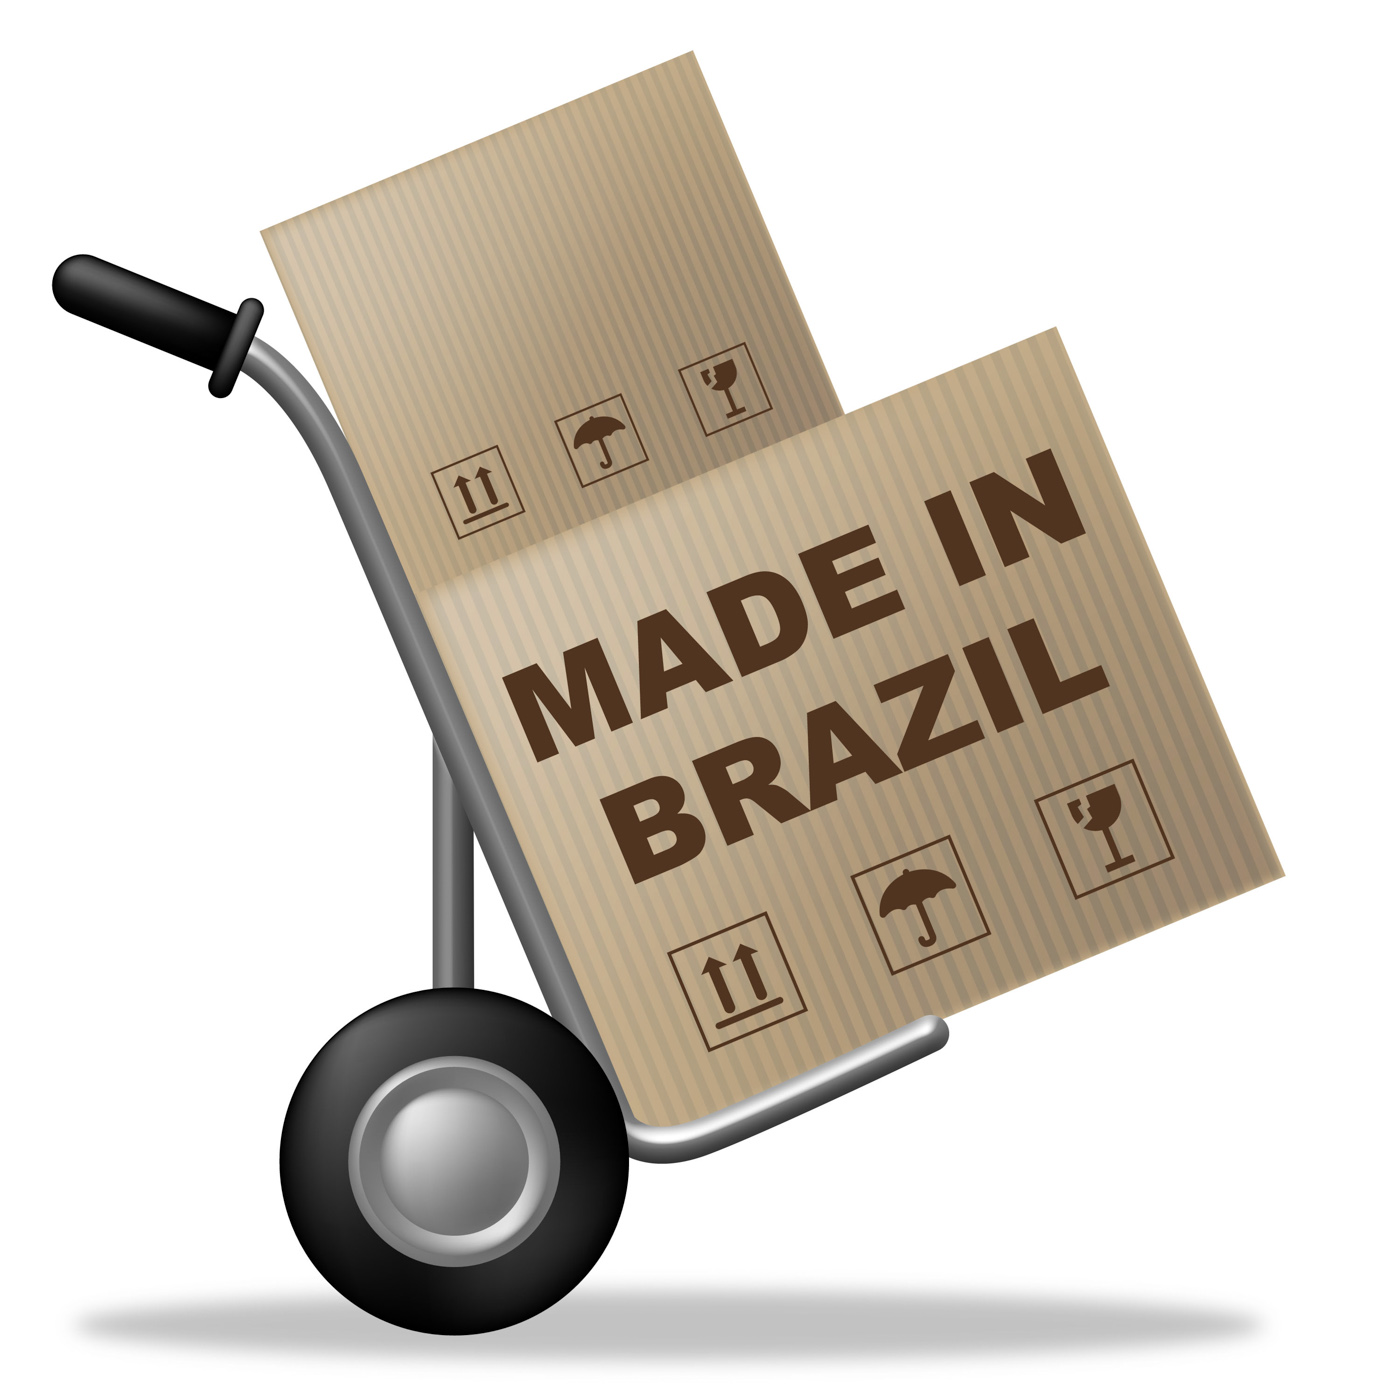 Made in brazil means factory trade and package photo